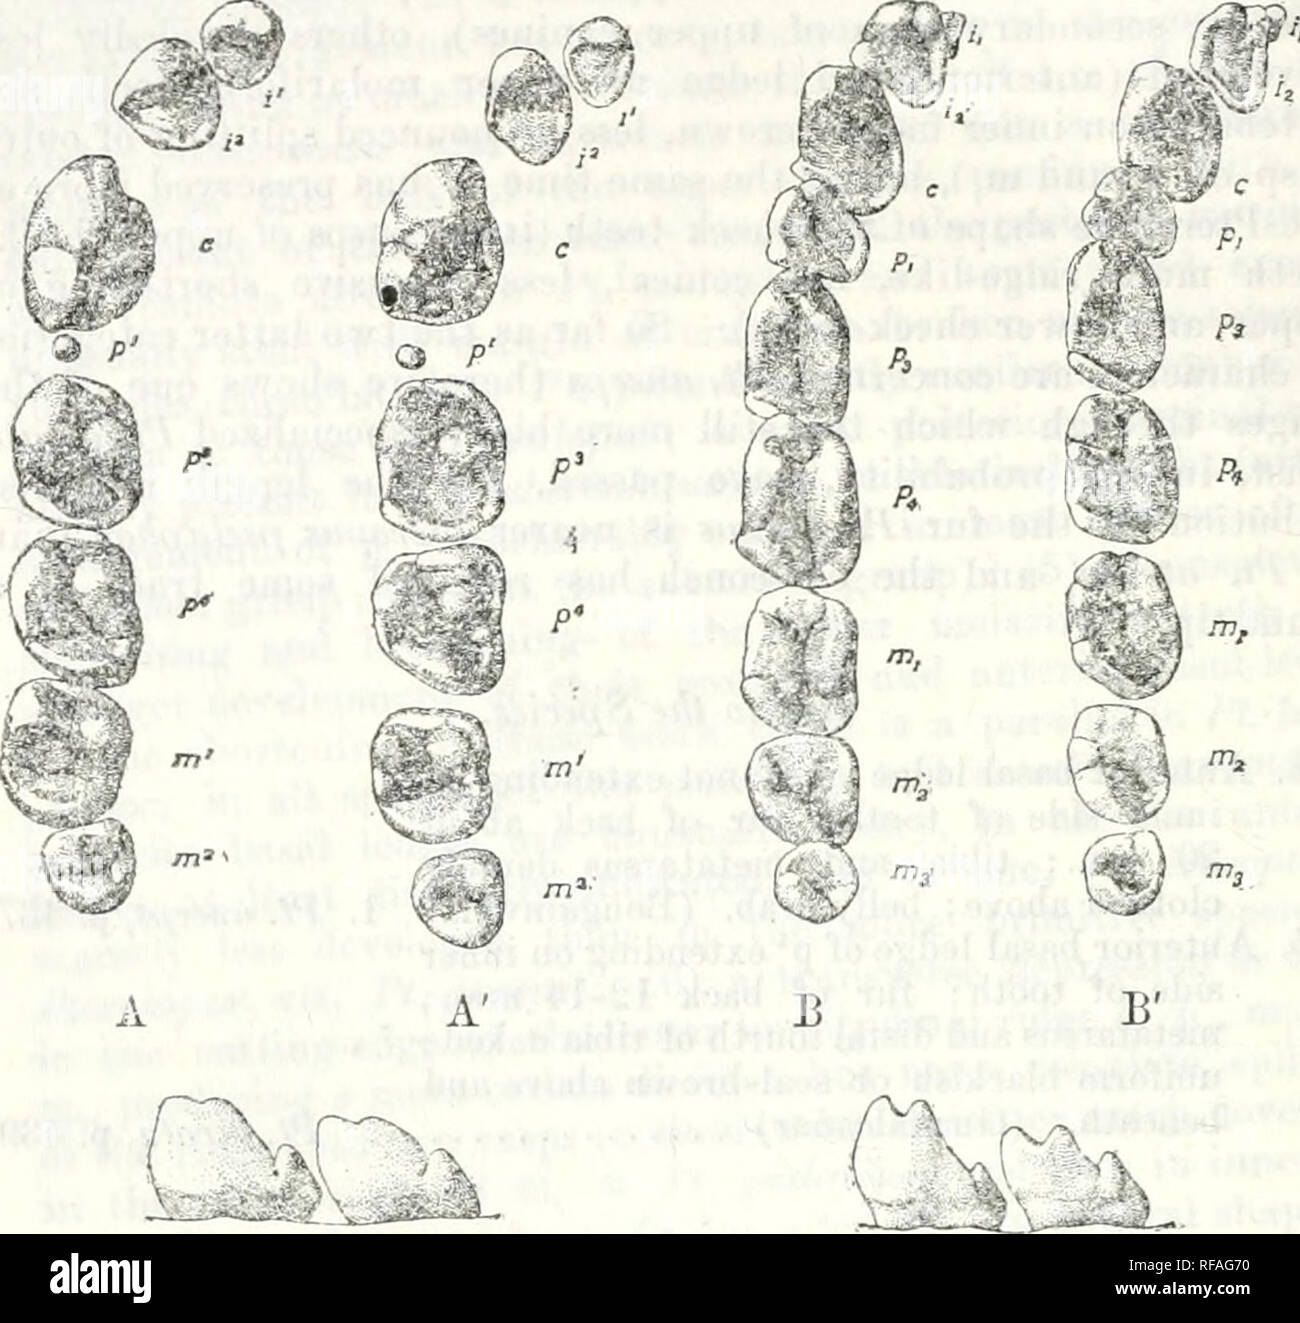 . Catalogue of the Chiroptera in the collection of the ... Museum. 438 pteralopex ANCErS. cusp not essentially different from that of p' of a Pteropvs, i.e. ridgc-like and constituting inner wall of tooth, not conical and pressed inward ou crushing surface, p^ and m' rather similar m general structure to p''.—Pj, p., and m, less shortened than in Ft. utraia, about one-half longer than broad. A shallow notch in cutting edge of outer main cusp of p^ and m, (fig. -^, C) ; inner main cusps of same teeth more ridge-like, less cusp-like (conical). U C' rig. 22.—A, upper right, B, lower left tooth-ro Stock Photo